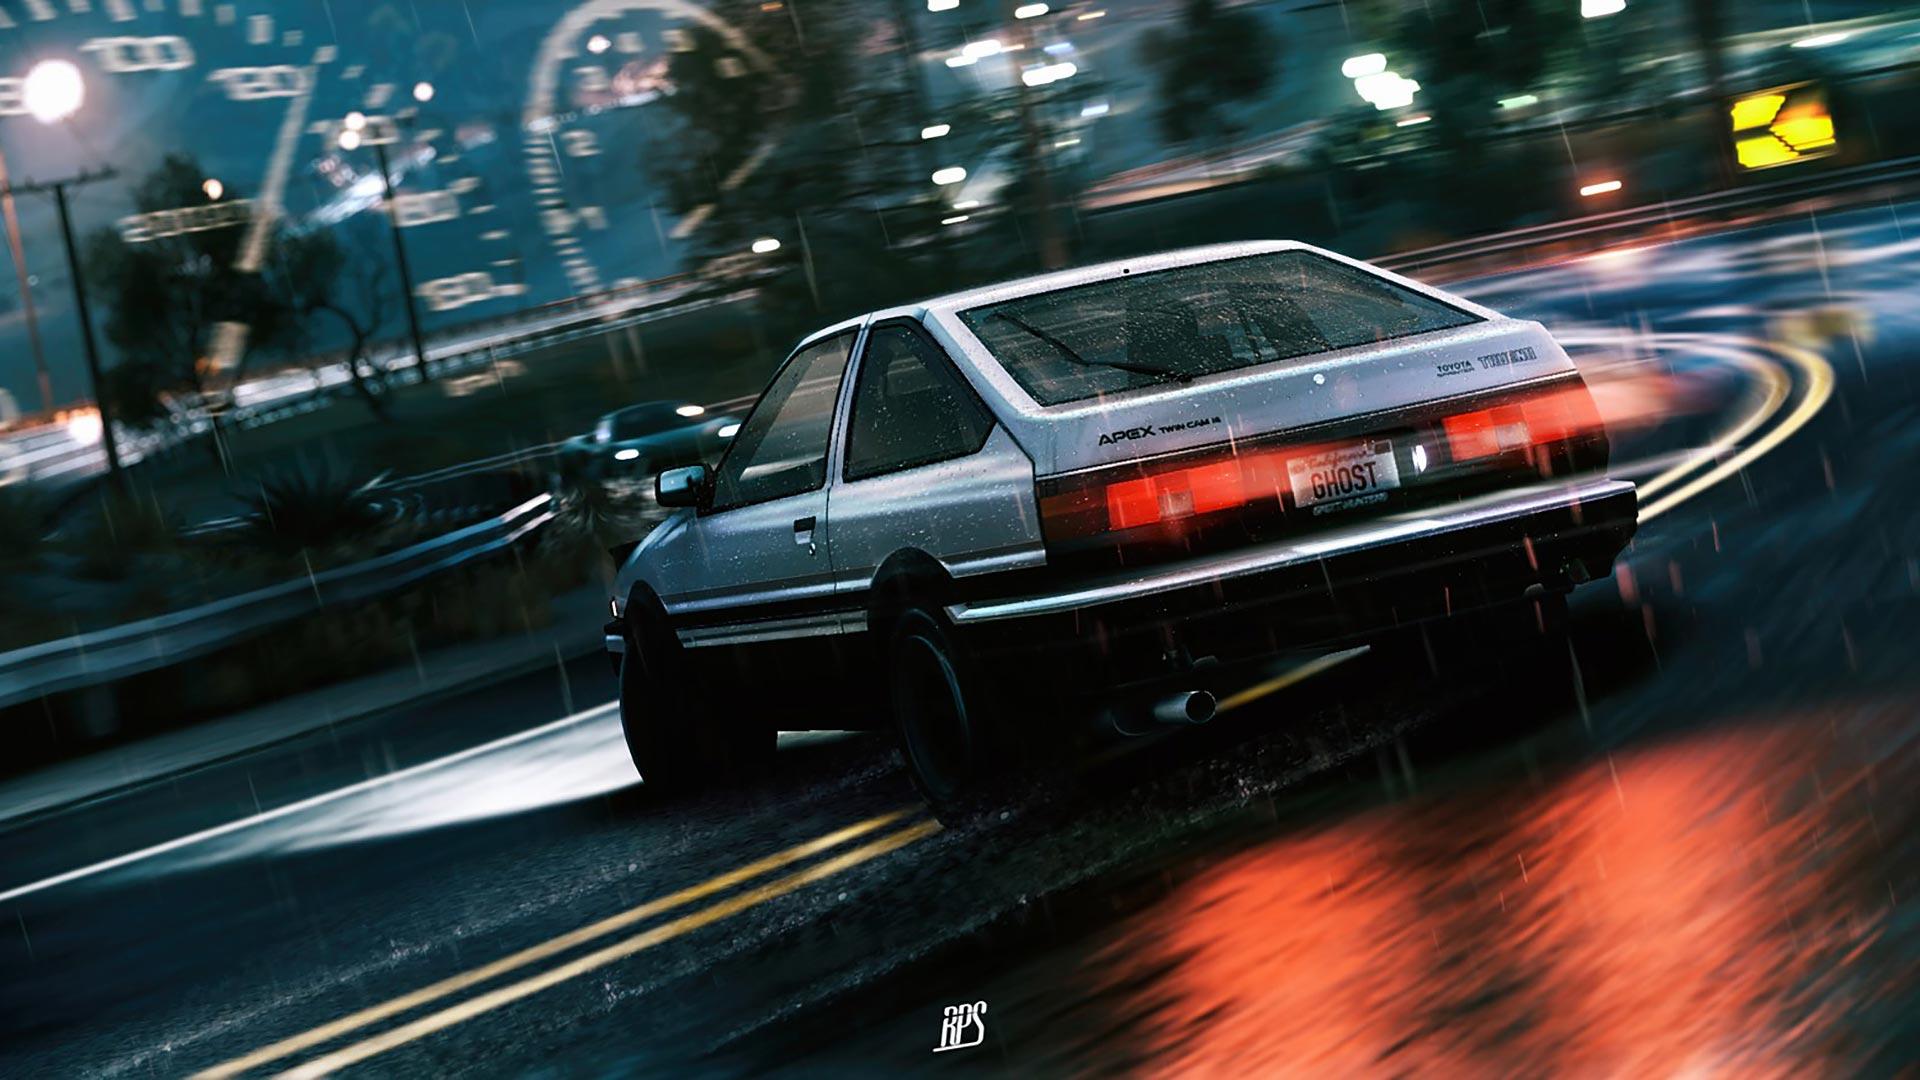 Initial D Theme for Windows 10